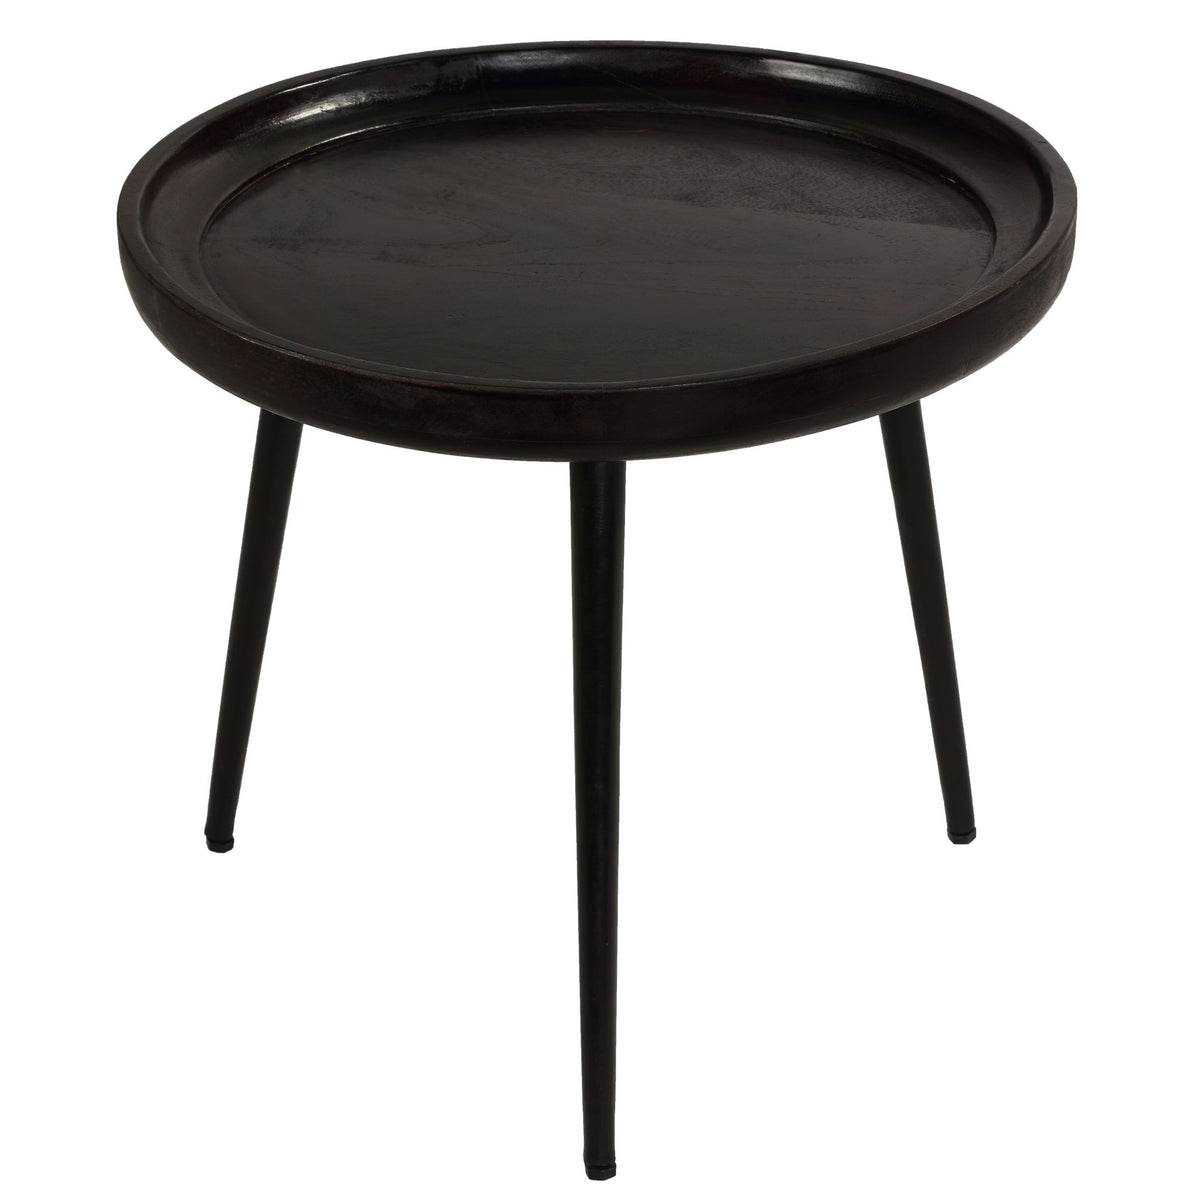 Bare Decor Manitoba Side Table in Solid Mango Wood, Round 20 in